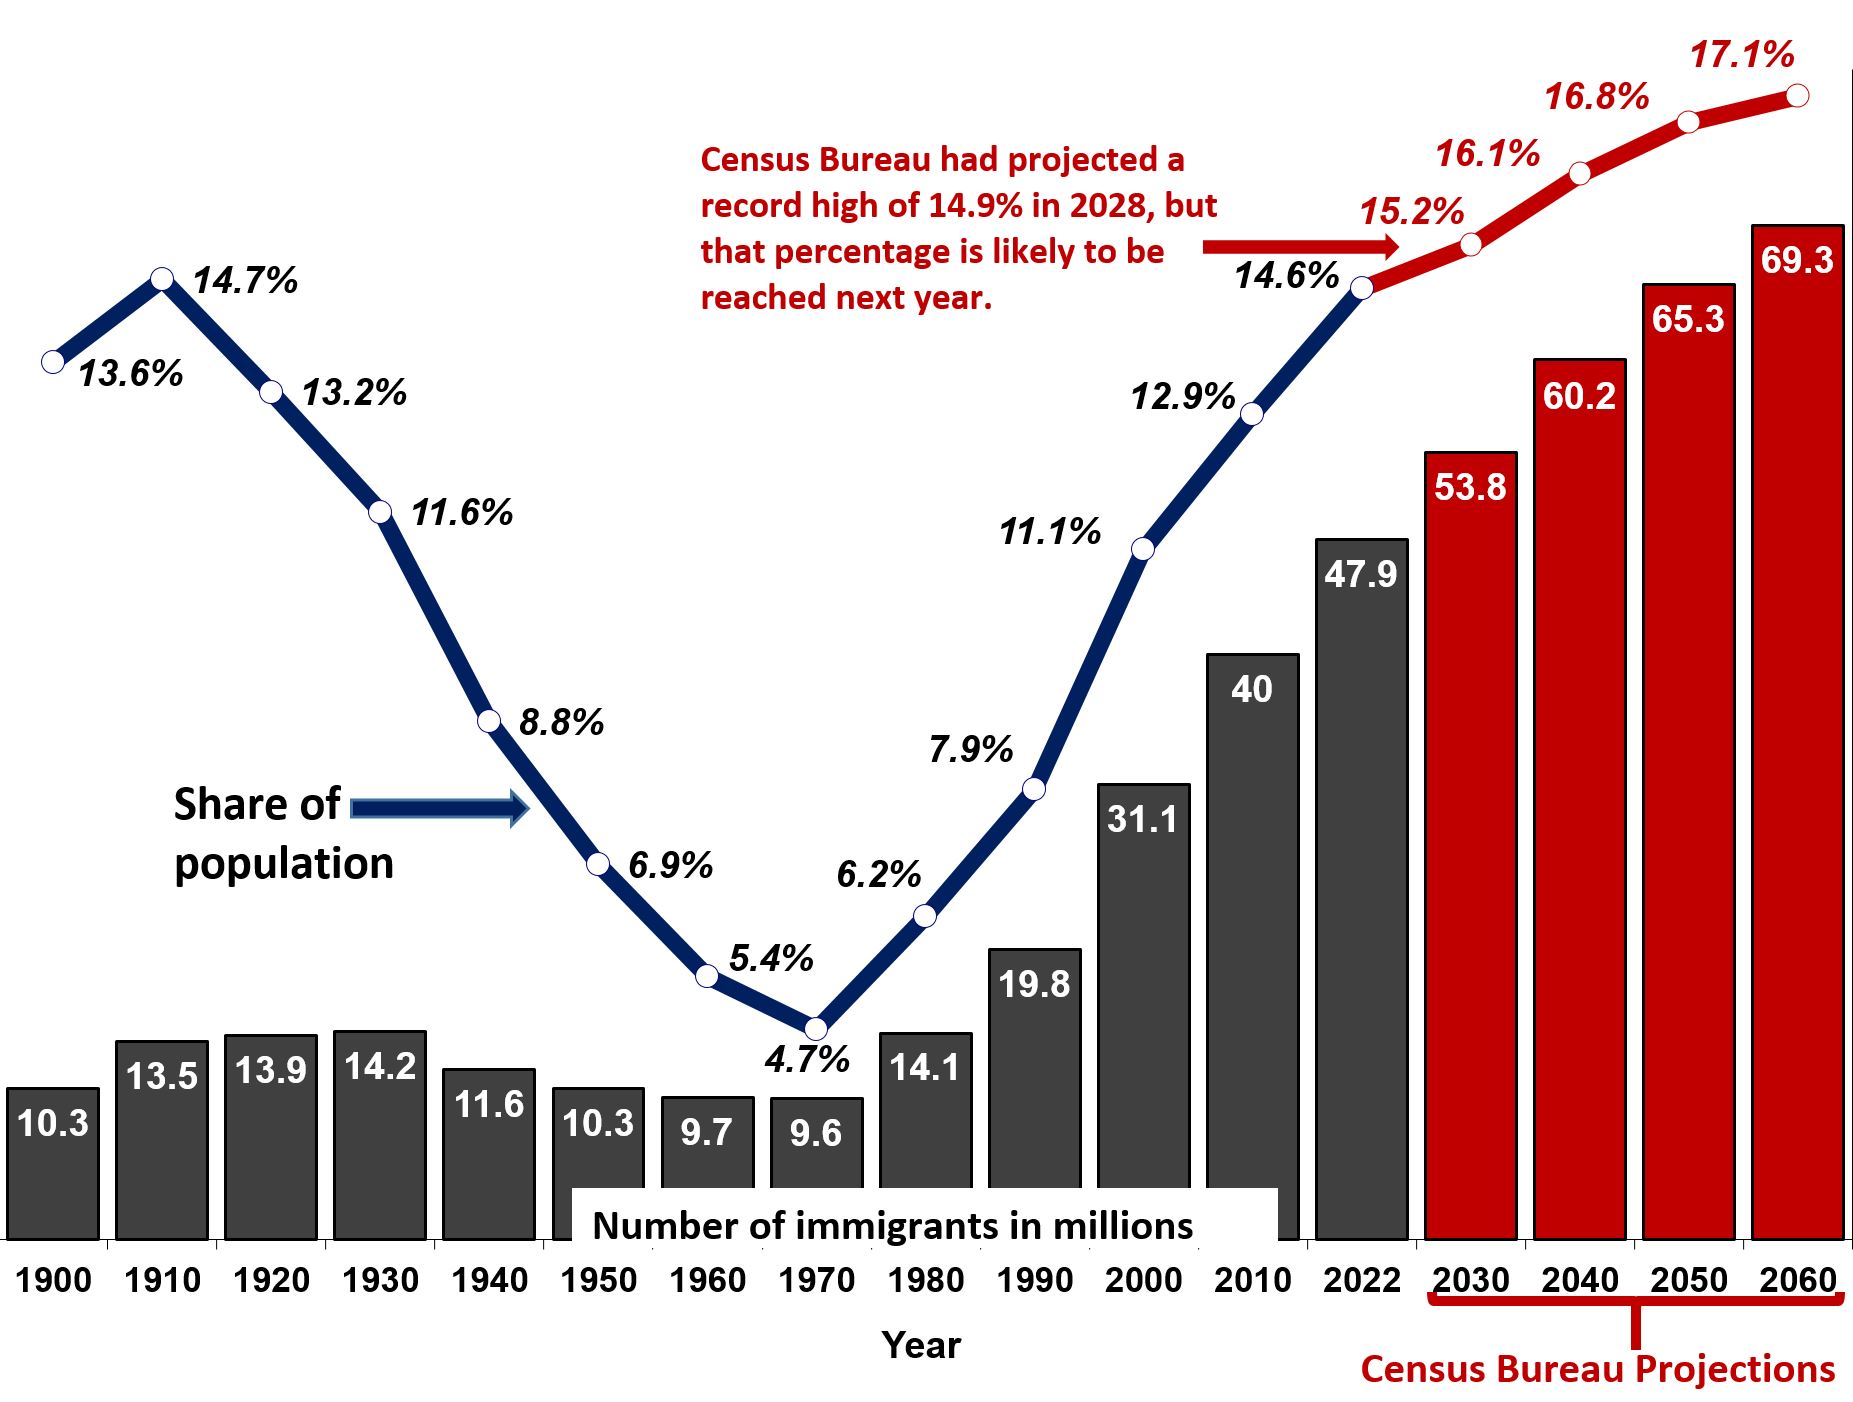 Foreign-Born Population in the US (1900-2022), plus Census Bureau Projections to 2060